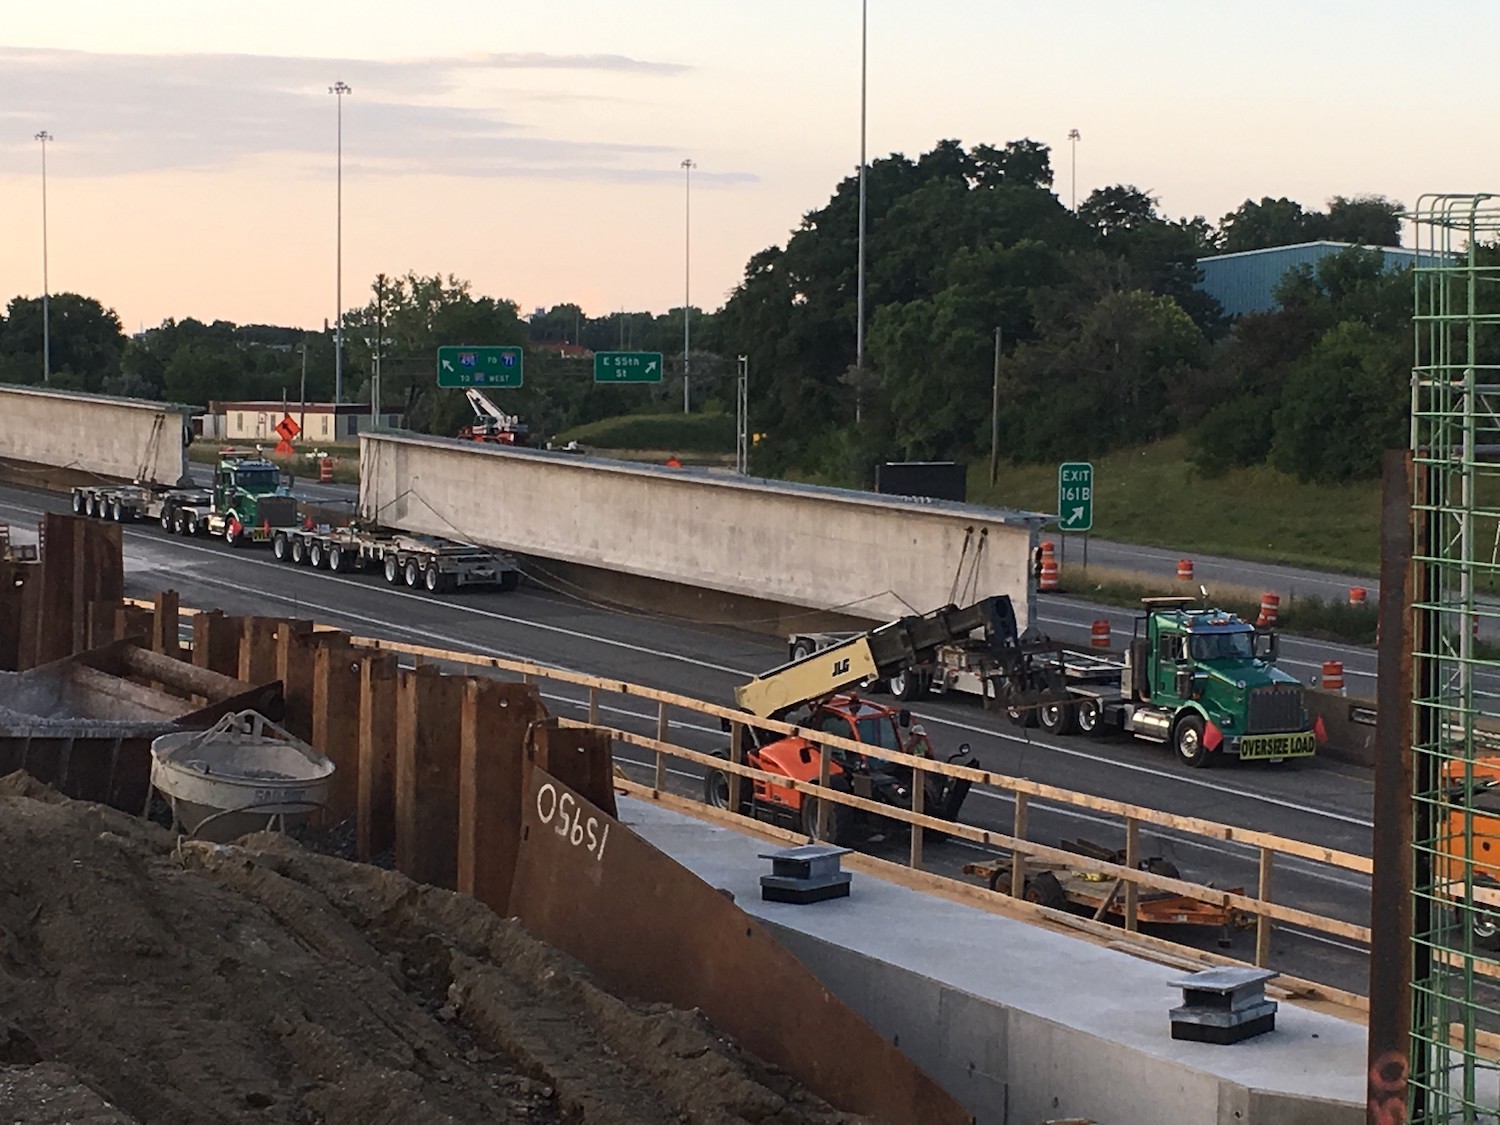 With the sun kind of set, two semis move large pieces of concrete for bridge construction.